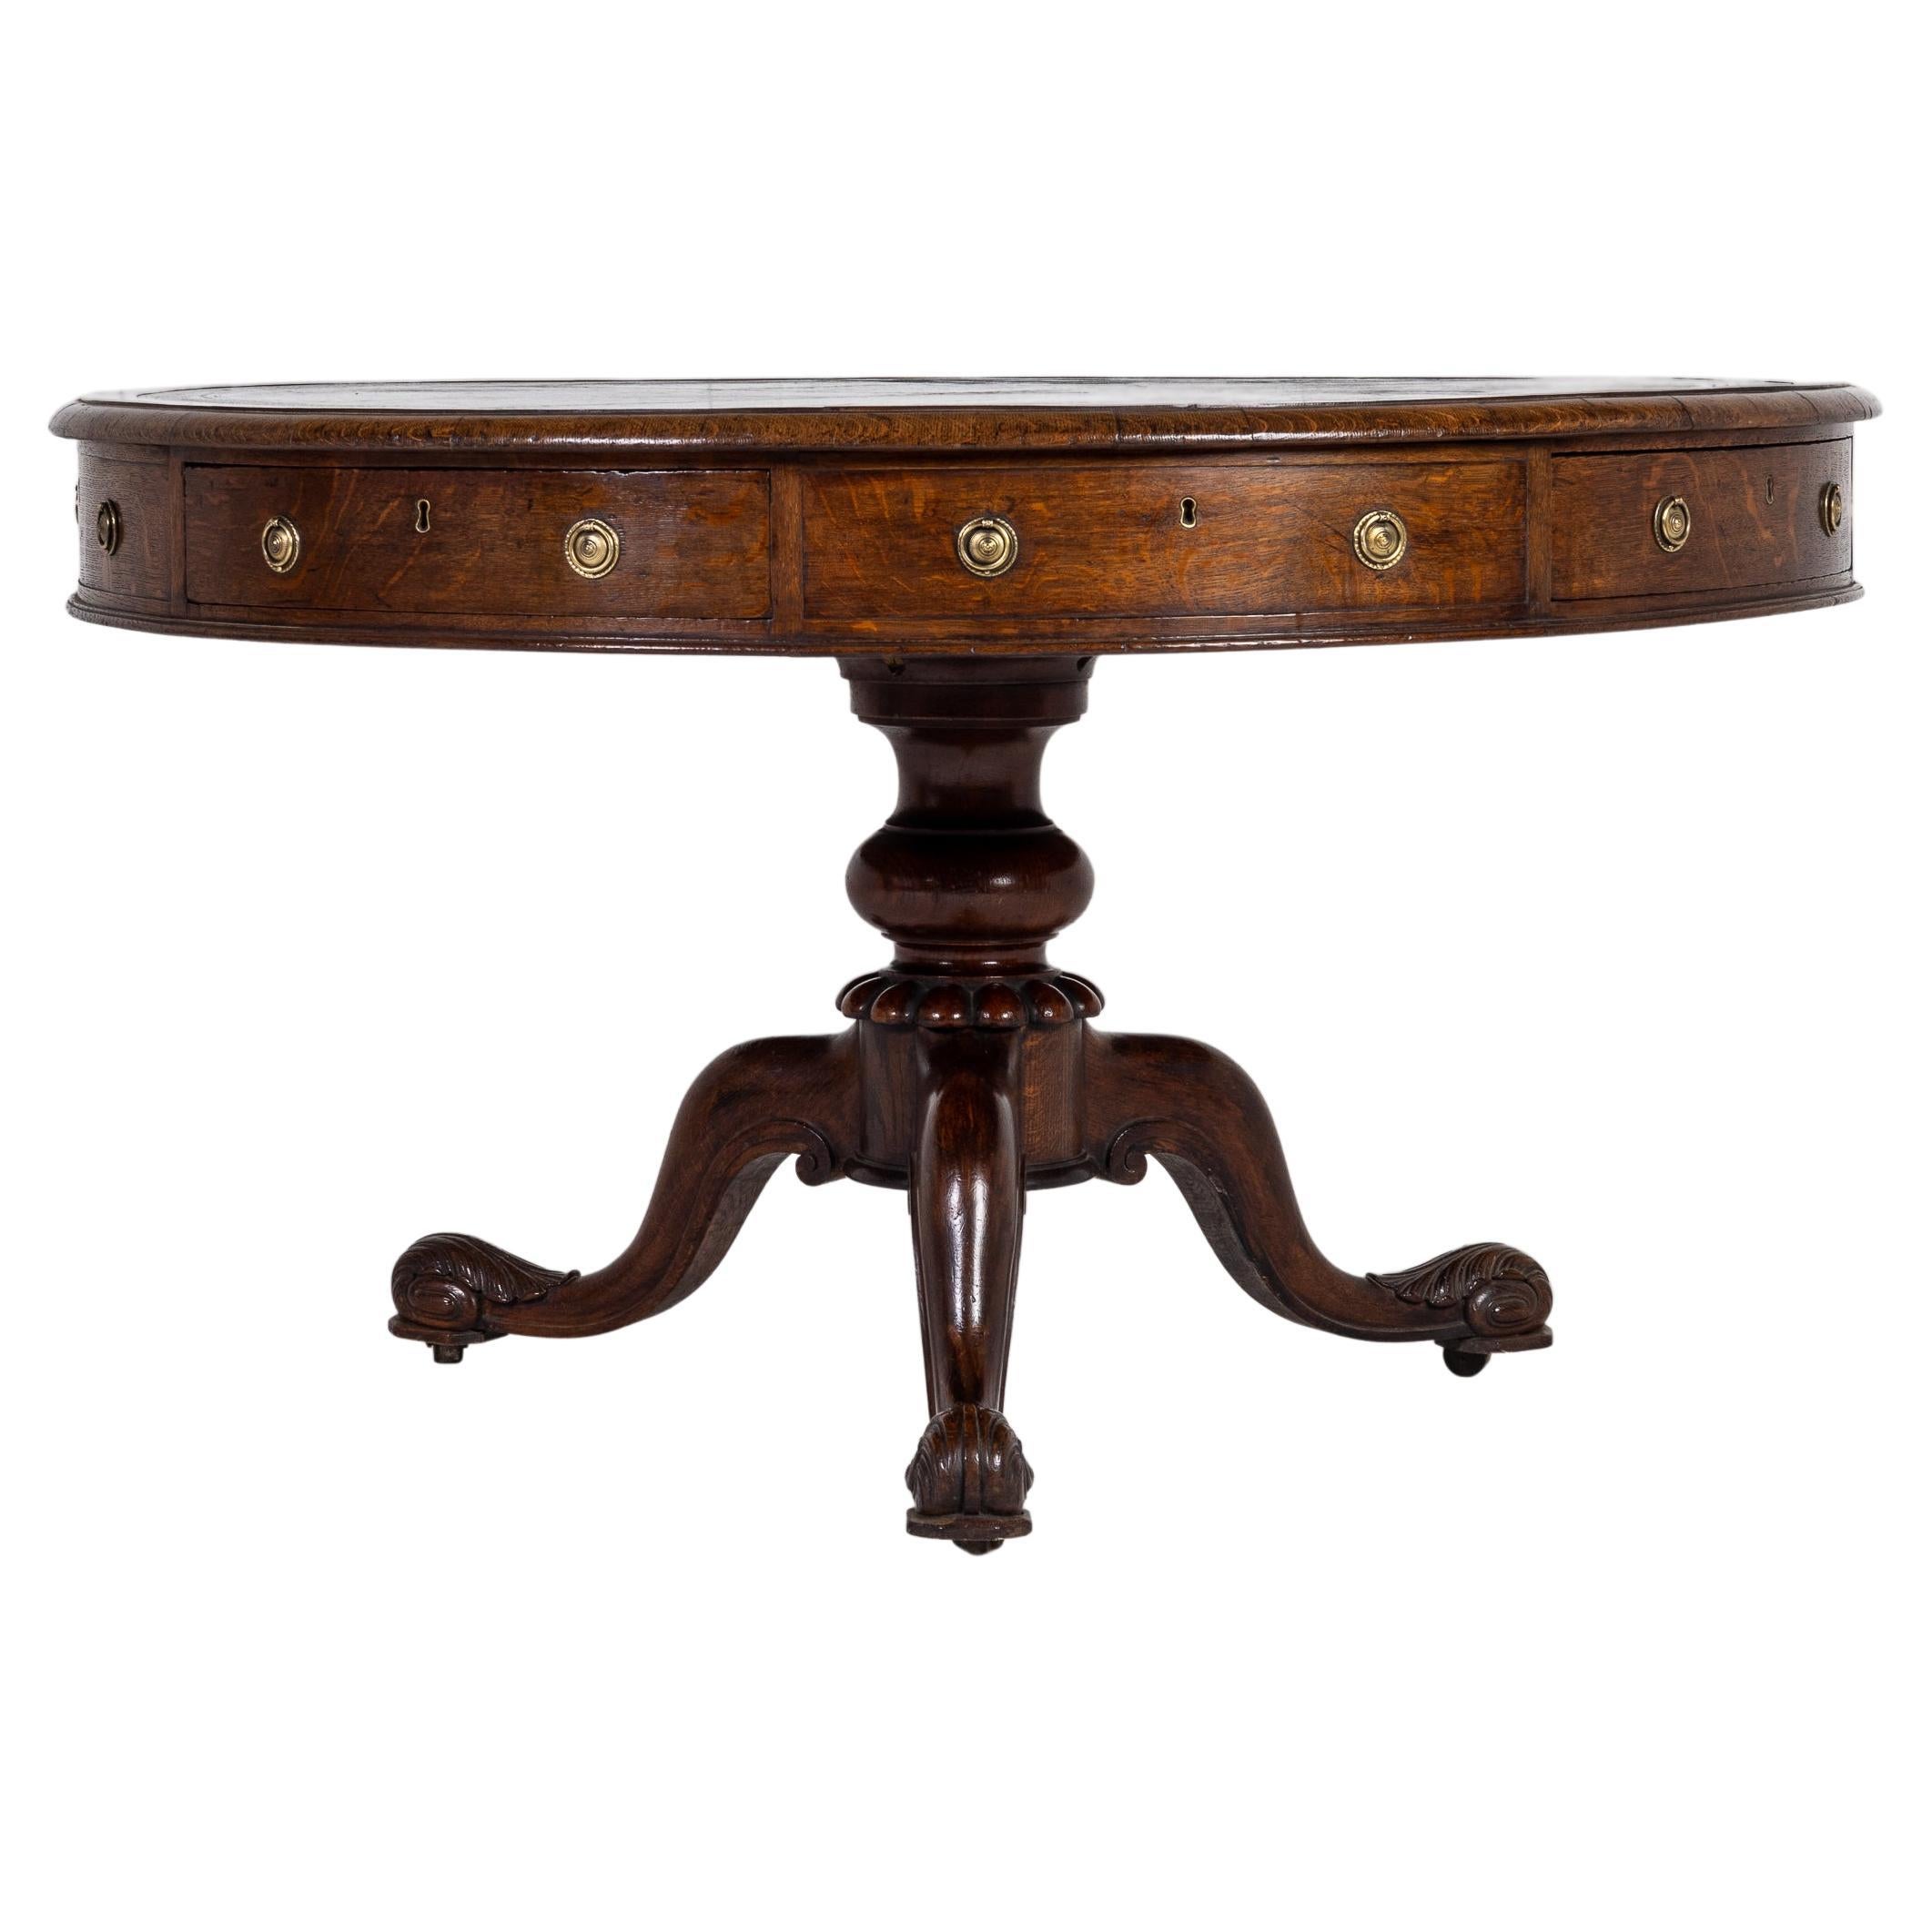 Late George IV/Early William IV Oak Drum Table (by Gillows)